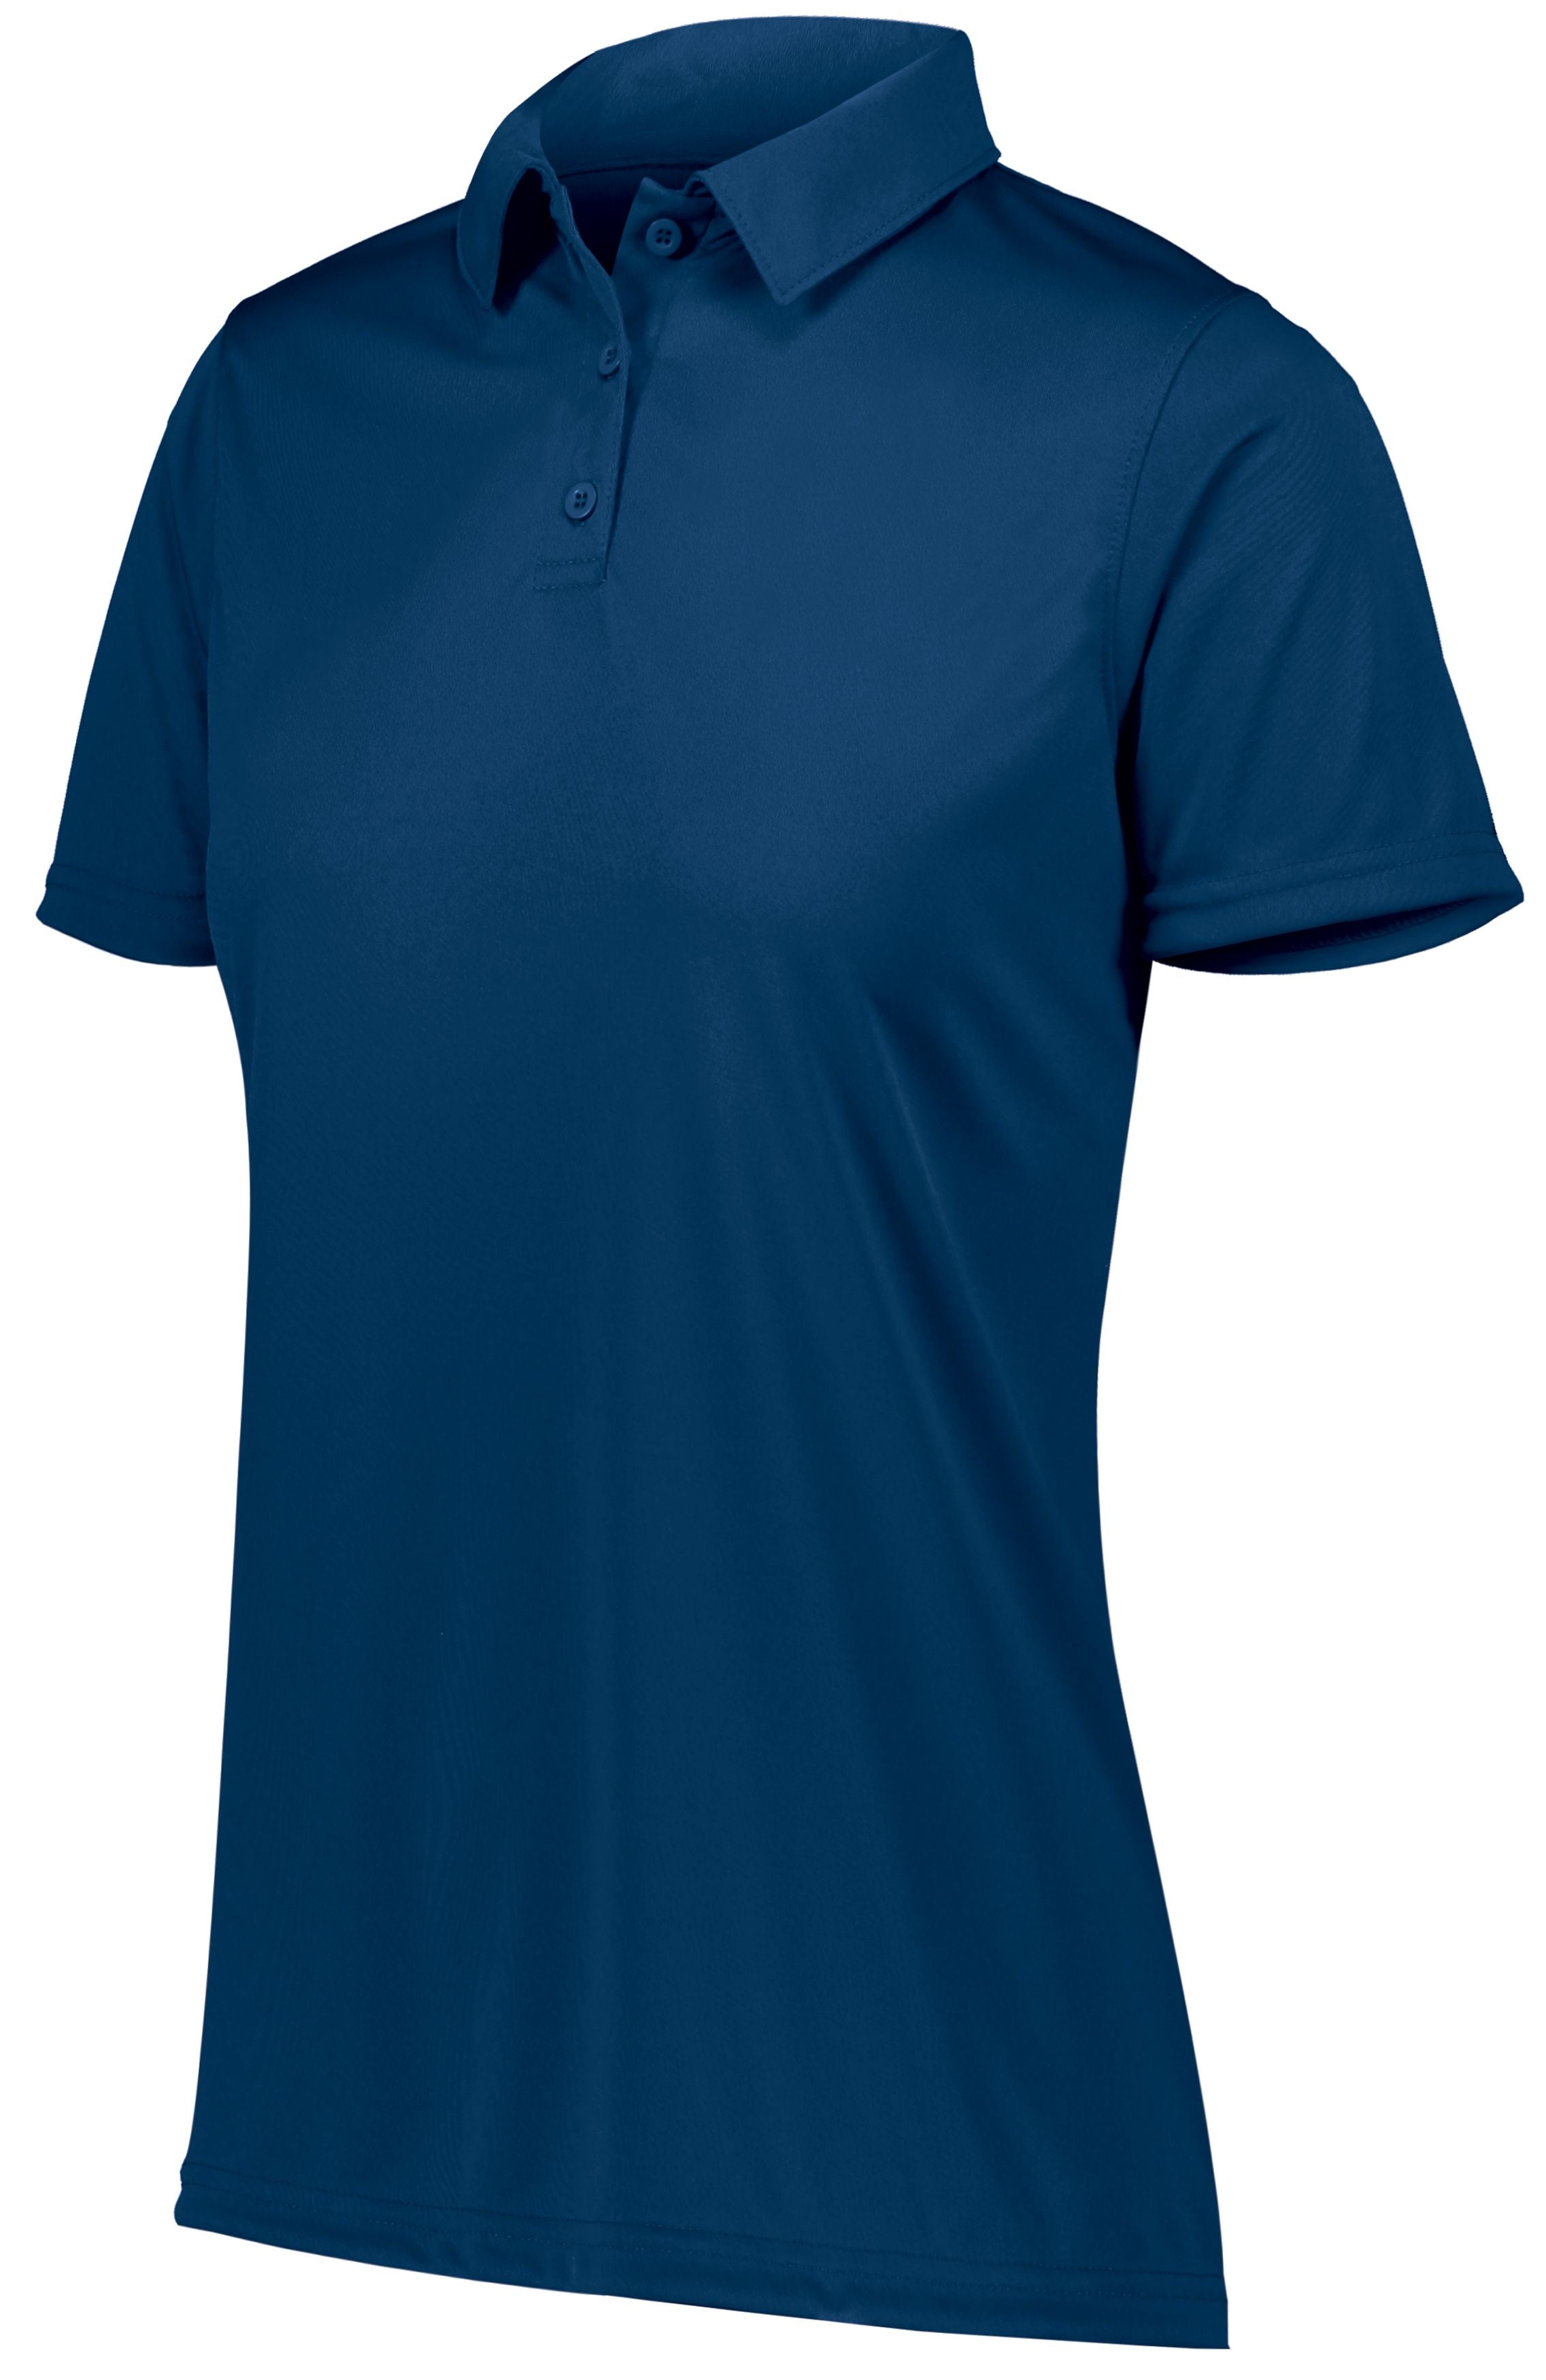 Augusta Sportswear Ladies Vital Polo in Navy  -Part of the Ladies, Ladies-Polo, Polos, Augusta-Products, Shirts product lines at KanaleyCreations.com